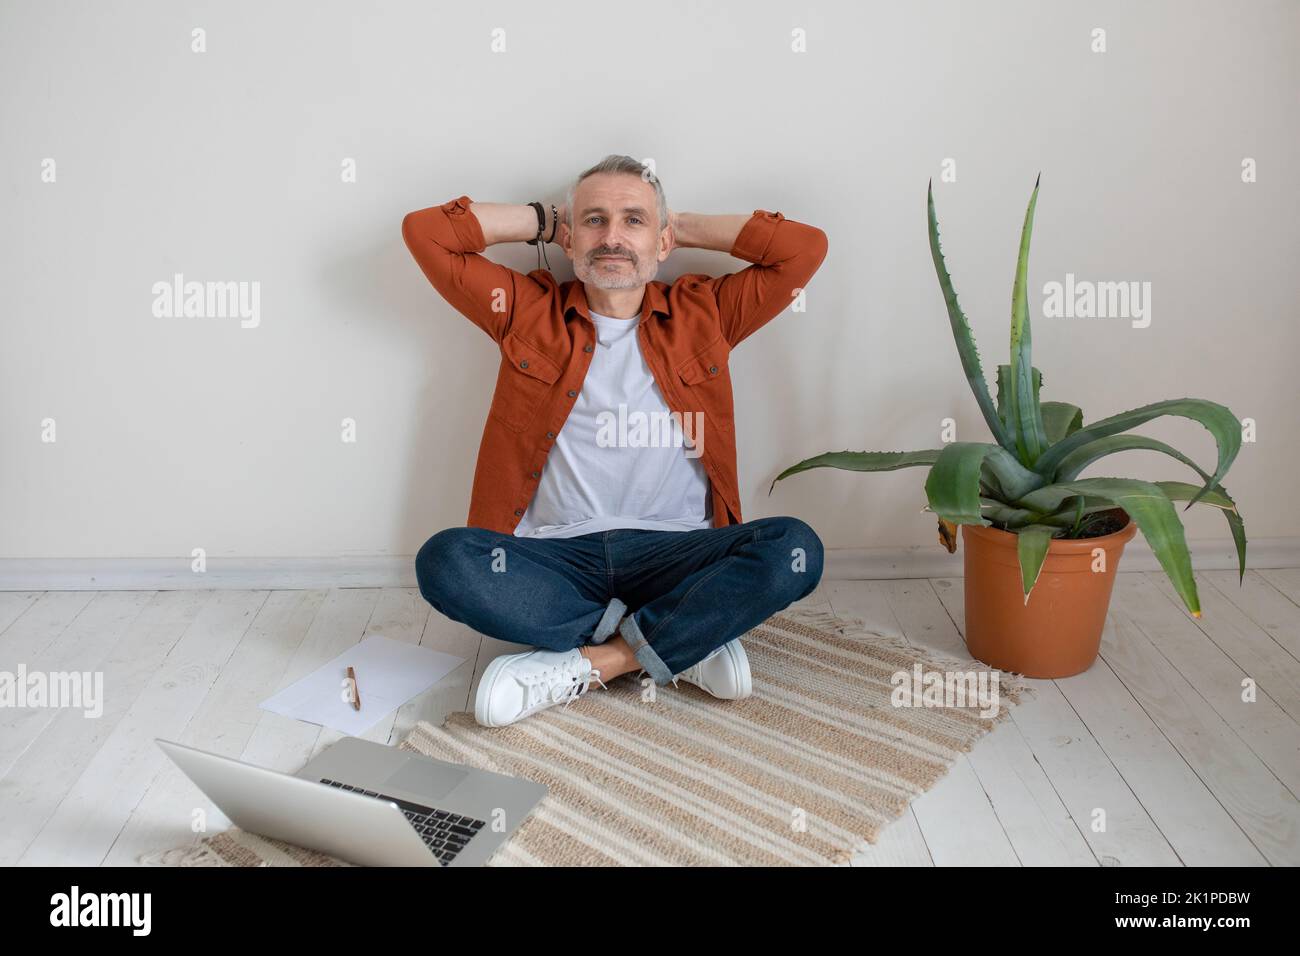 A man sitting on the floor with his legs crossed and resting from work Stock Photo